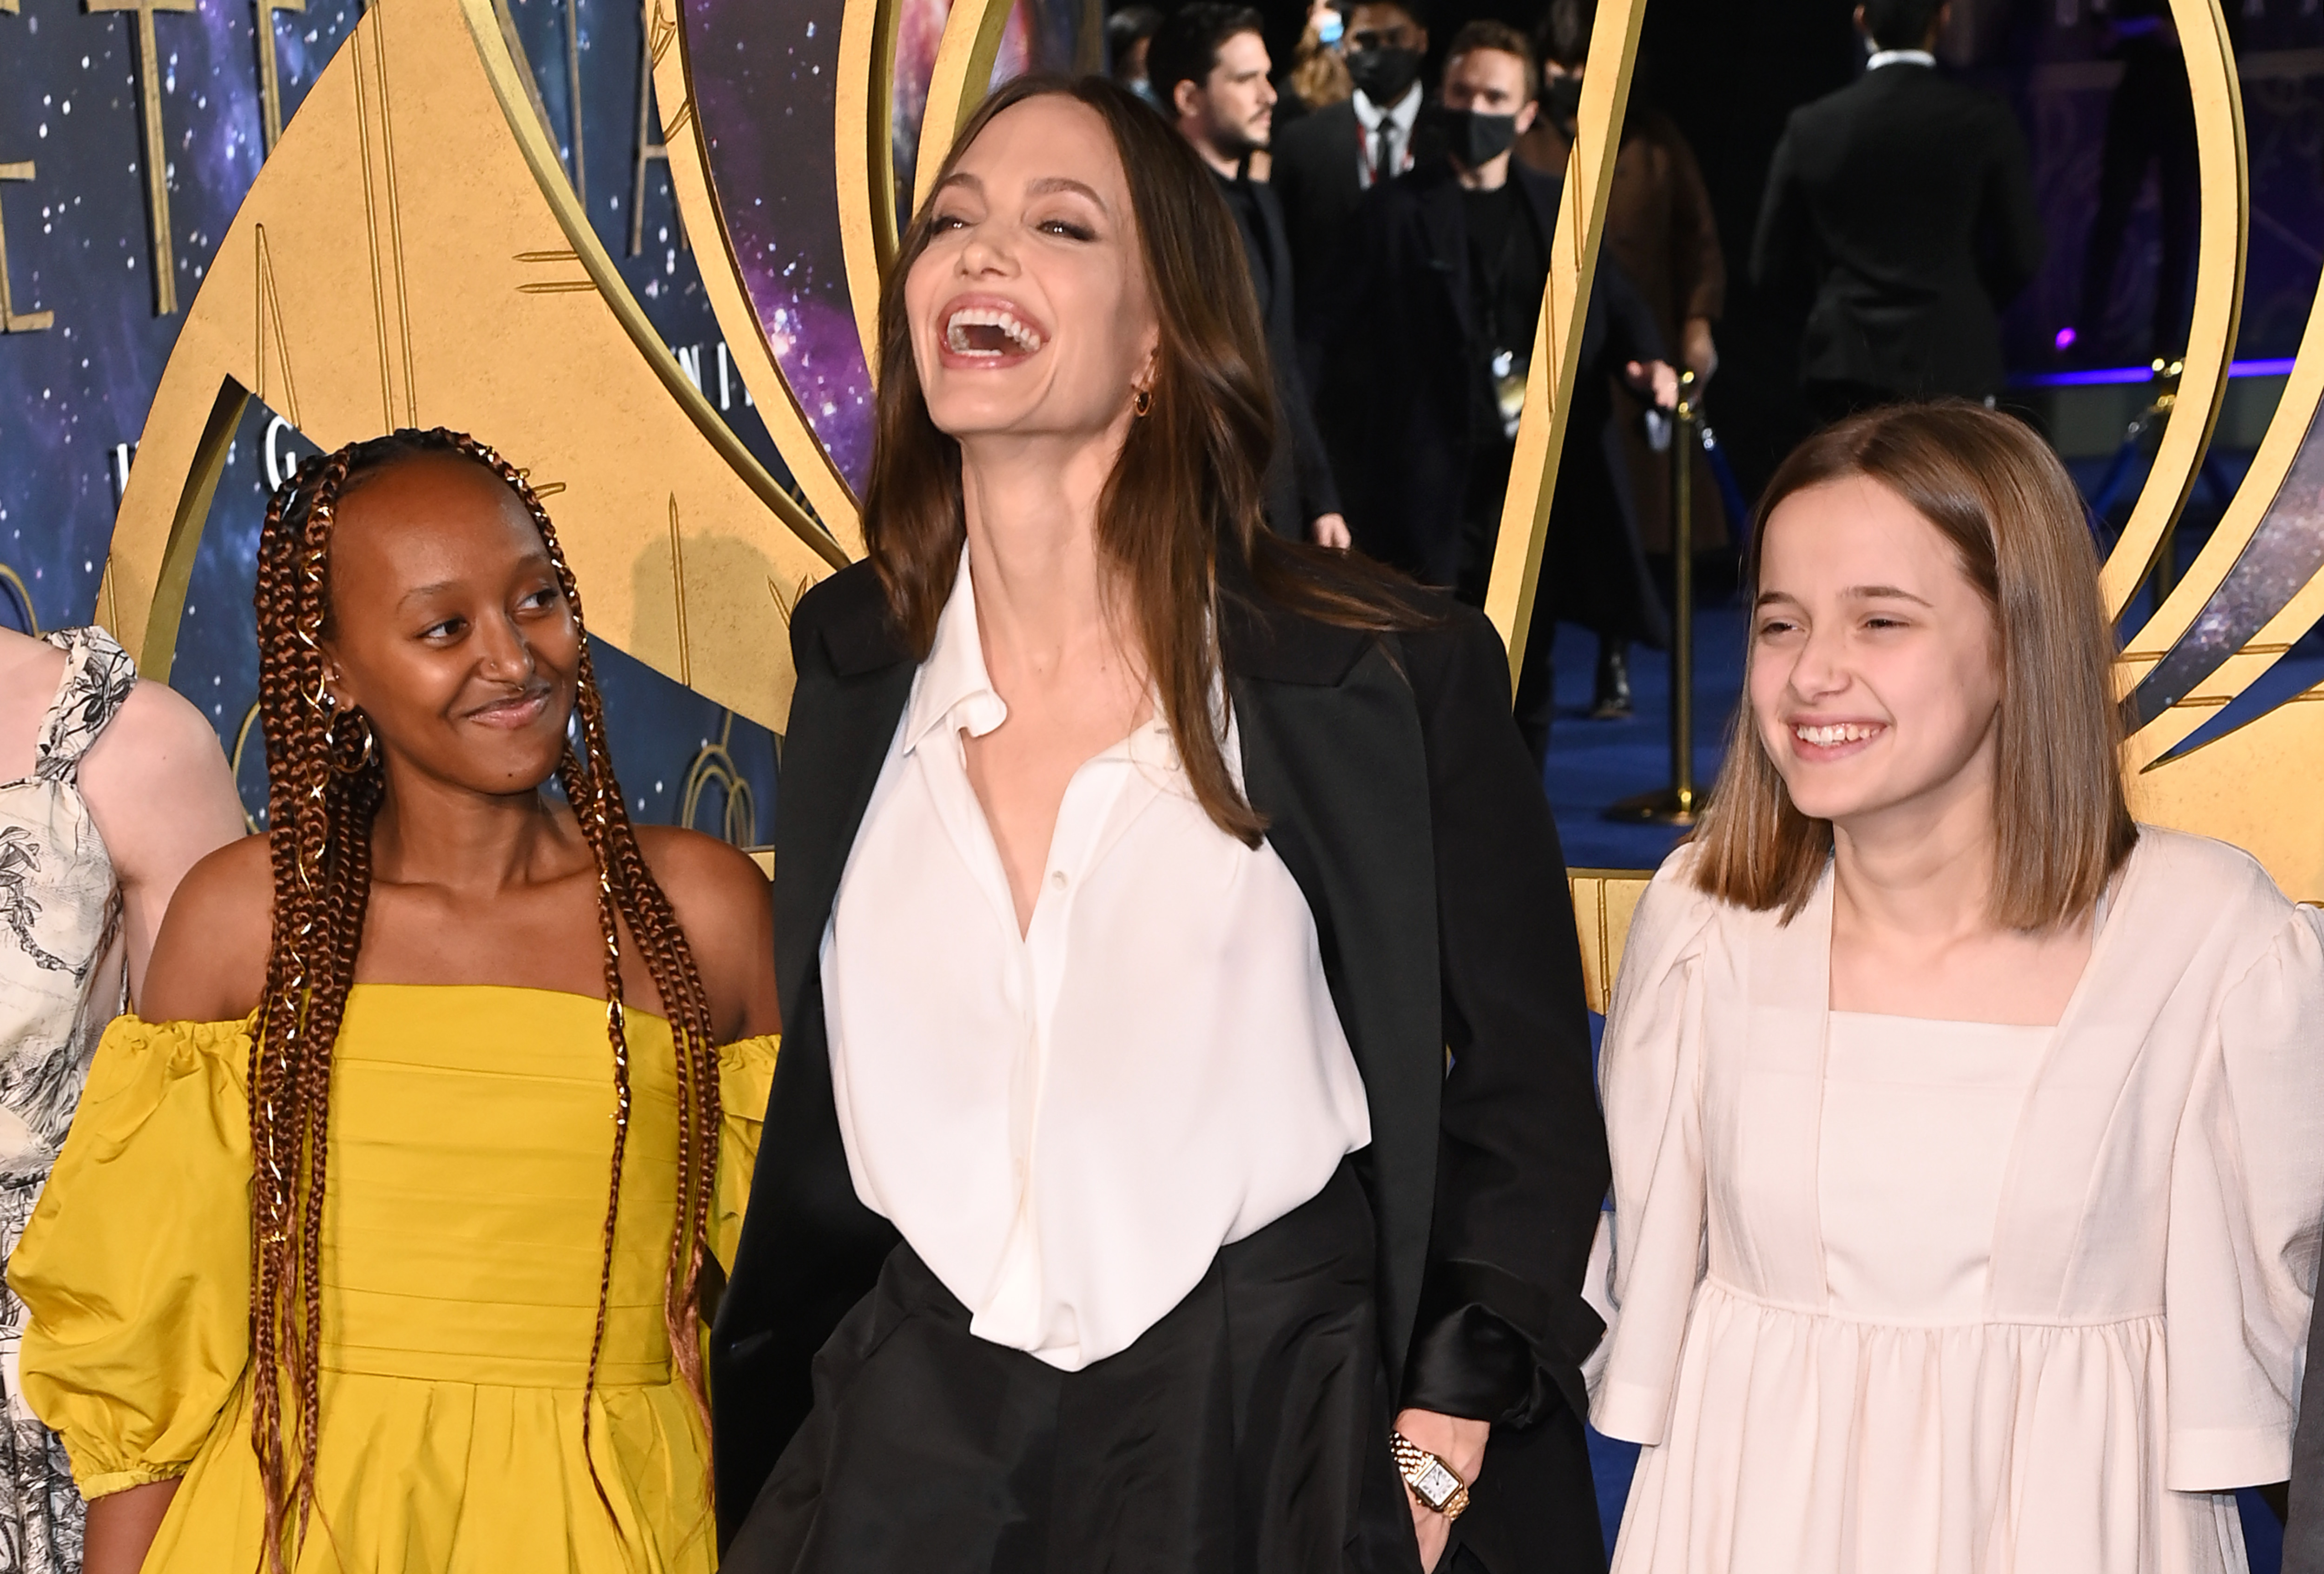 Angelina Jolie, daughters Zahara and Vivienne Jolie-Pitt attend the gala screening of "The Eternals" at the BFI IMAX Waterloo on October 27, 2021, in London, England. | Source: Getty Images